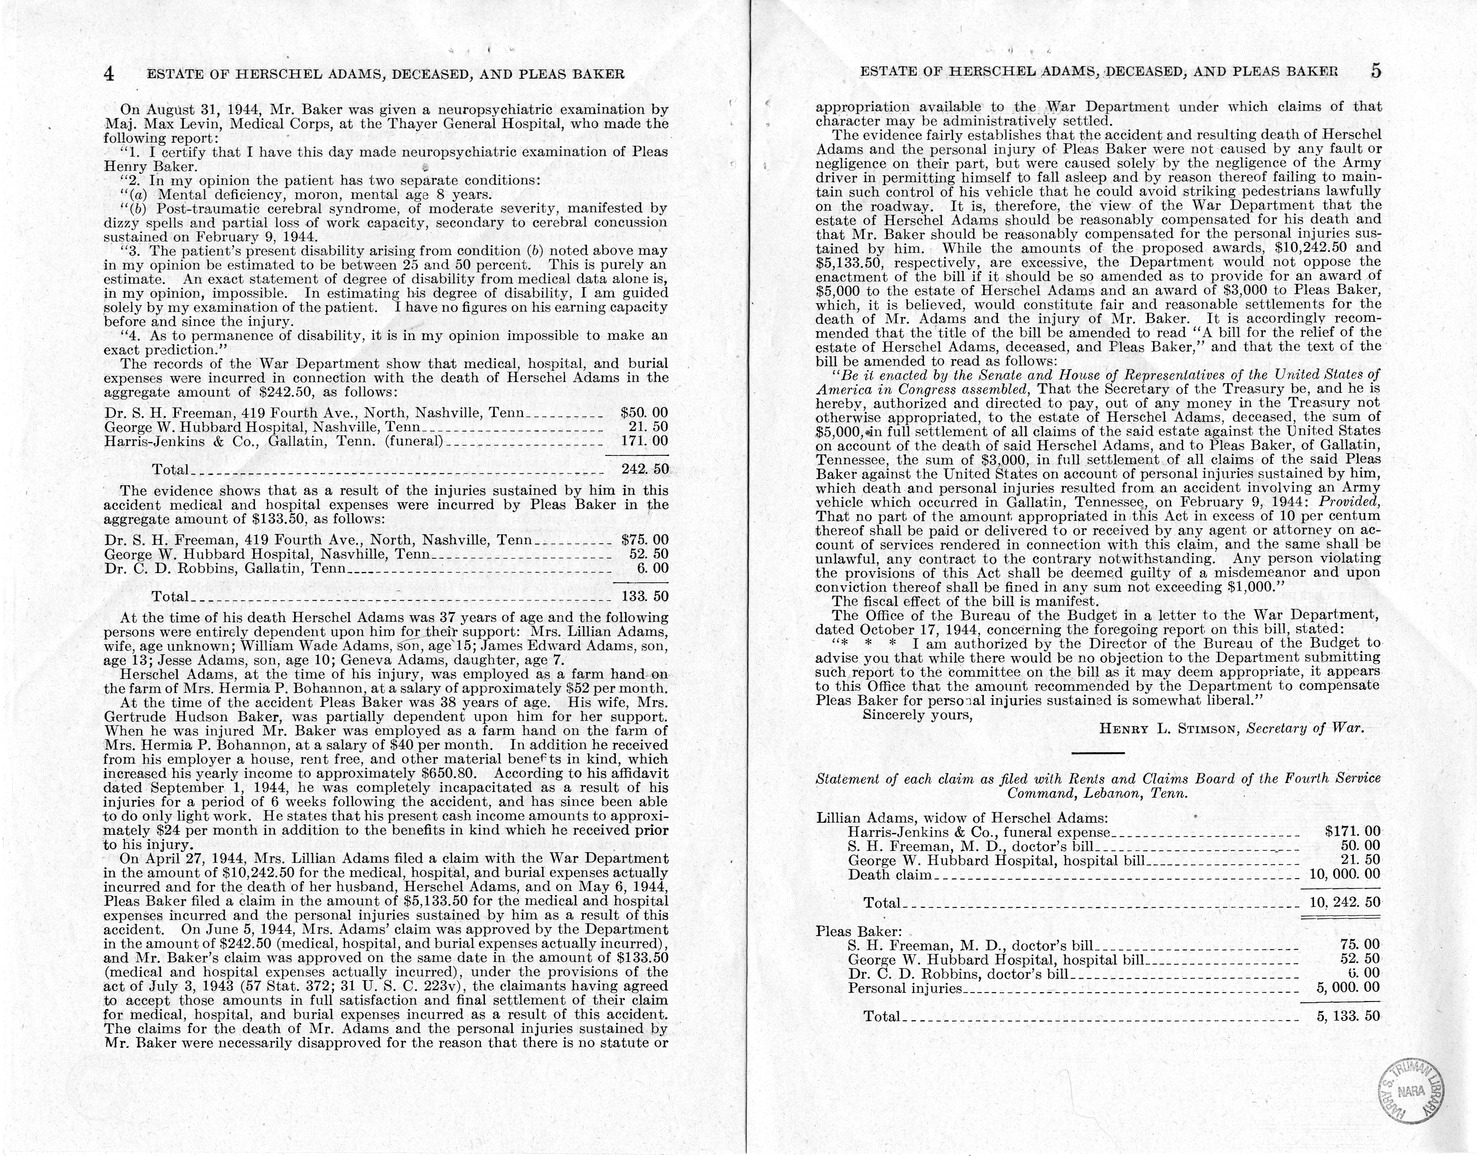 Memorandum from Frederick J. Bailey to M. C. Latta, H.R. 2727, For the Relief of the Estate of Herschel Adams, Deceased, and Pleas Baker, with Attachments